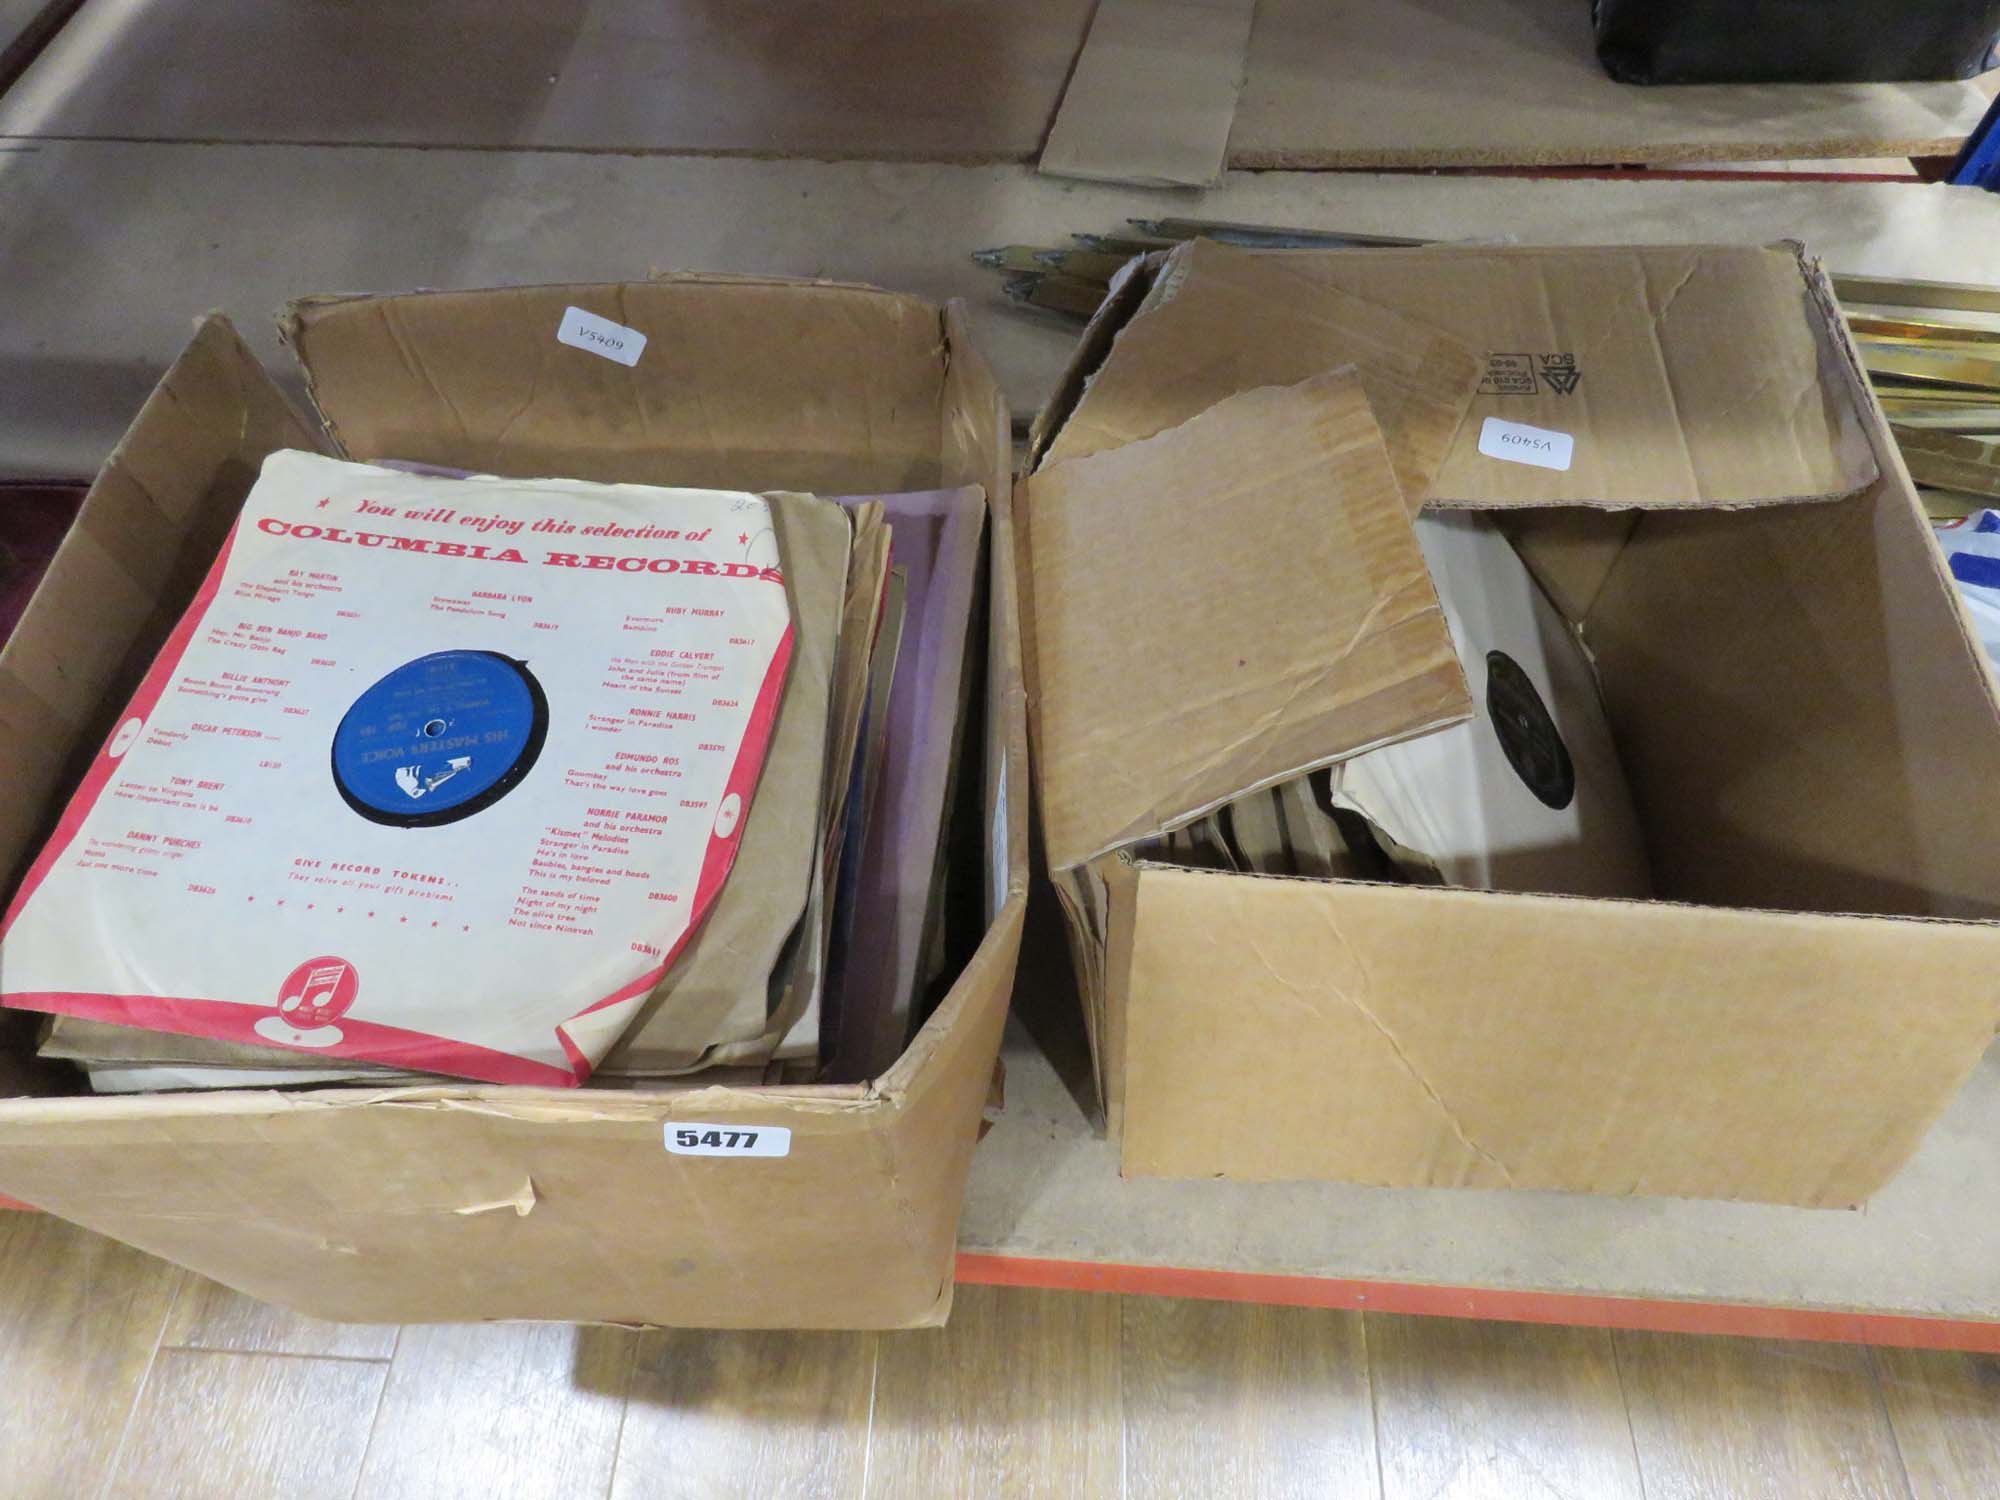 2 boxes containing records